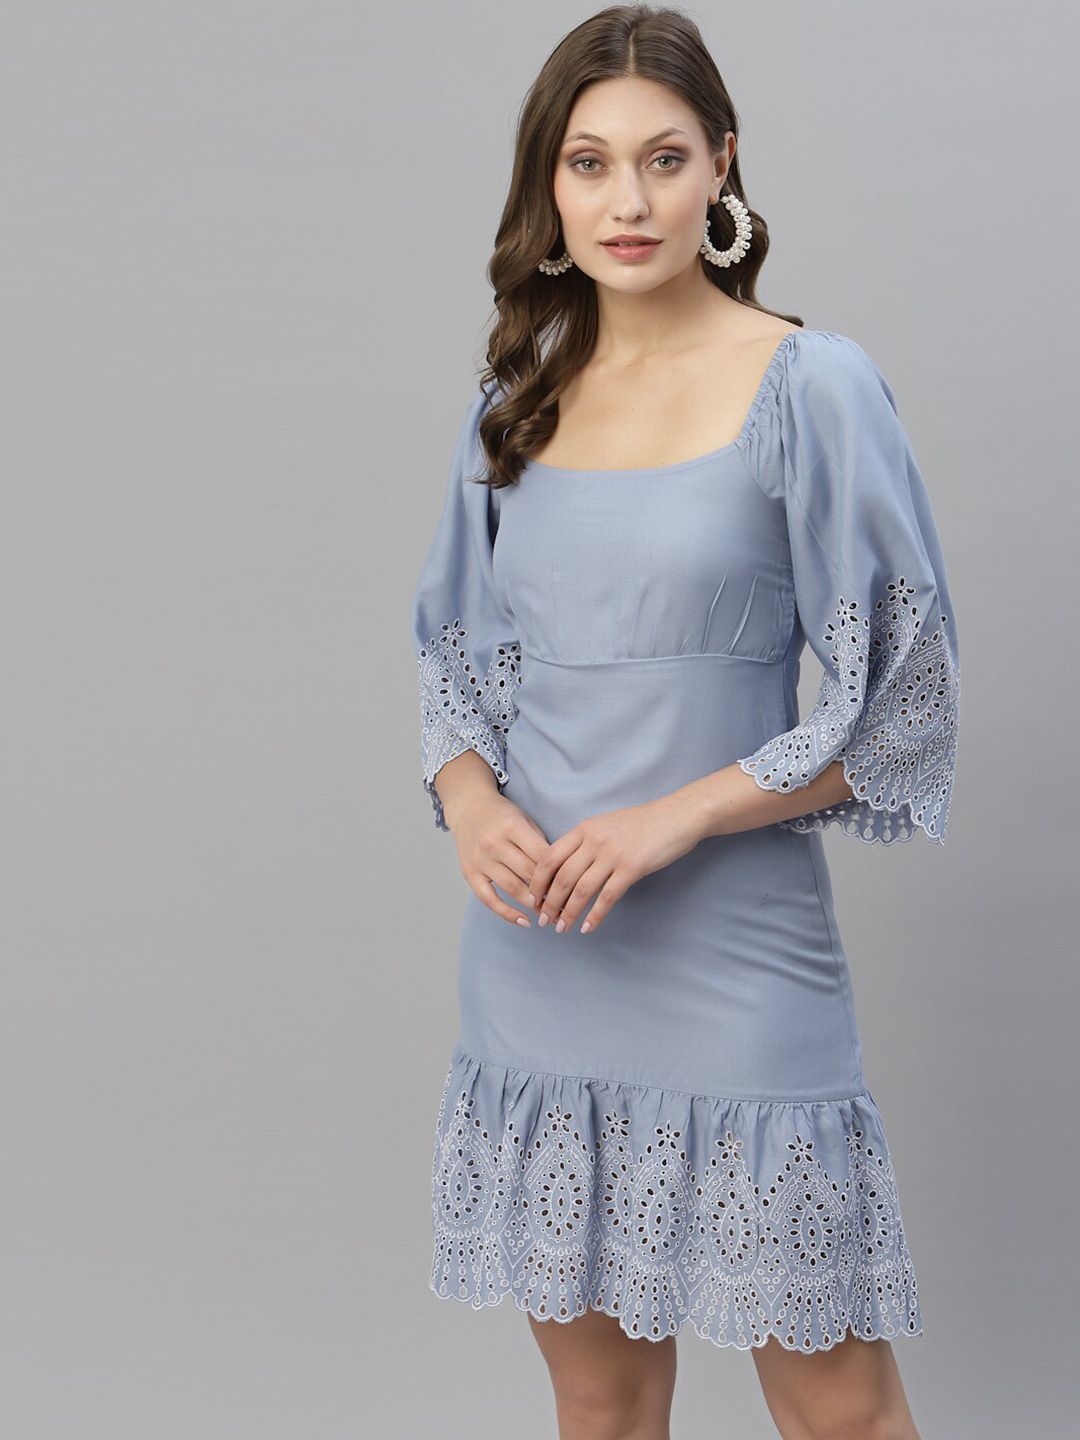 KASSUALLY Blue A-Line Dress Price in India